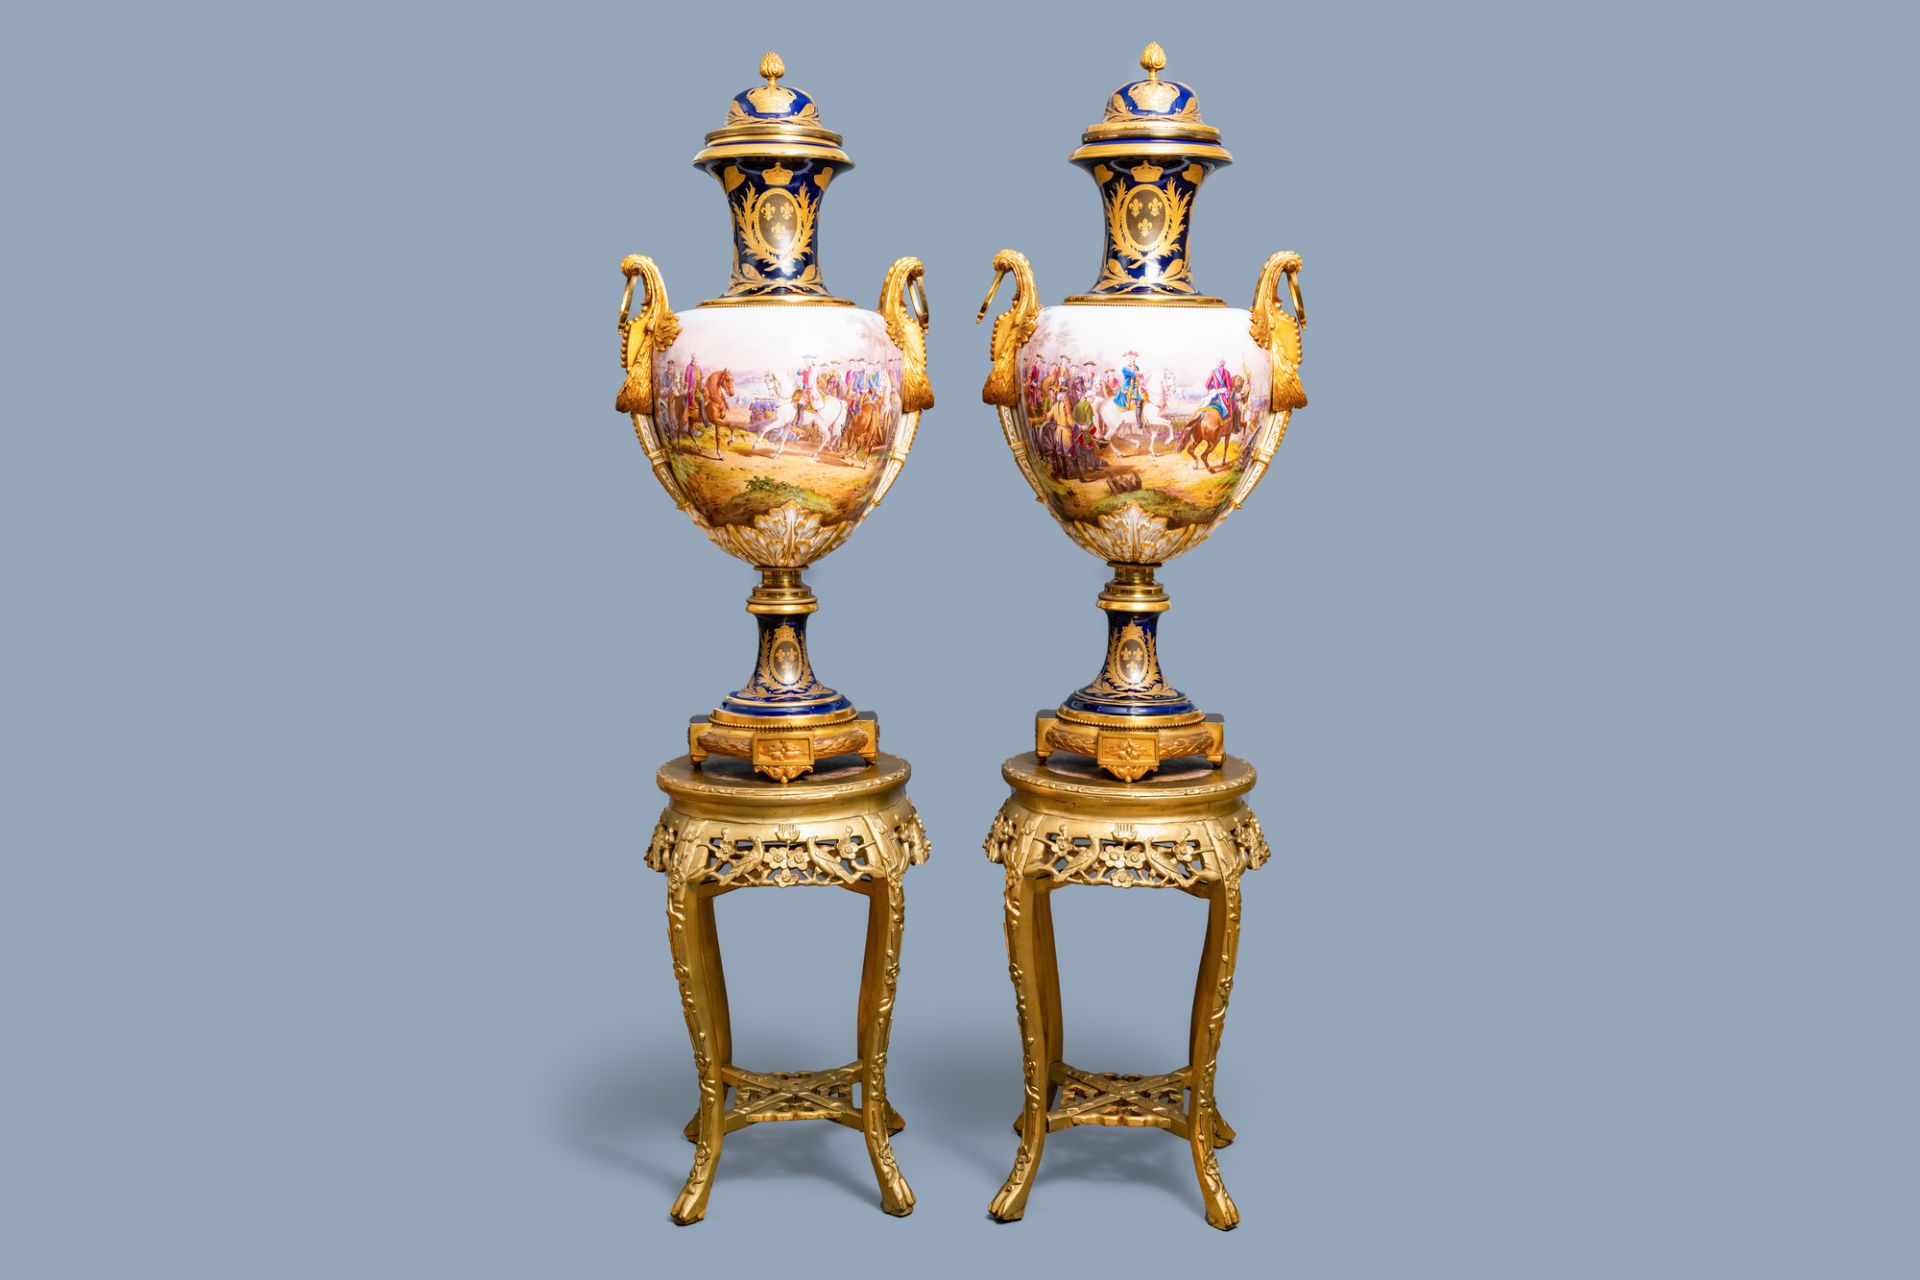 A pair of massive French Svres-style vases with gilded bronze mounts, signed Desprez, 19th C.